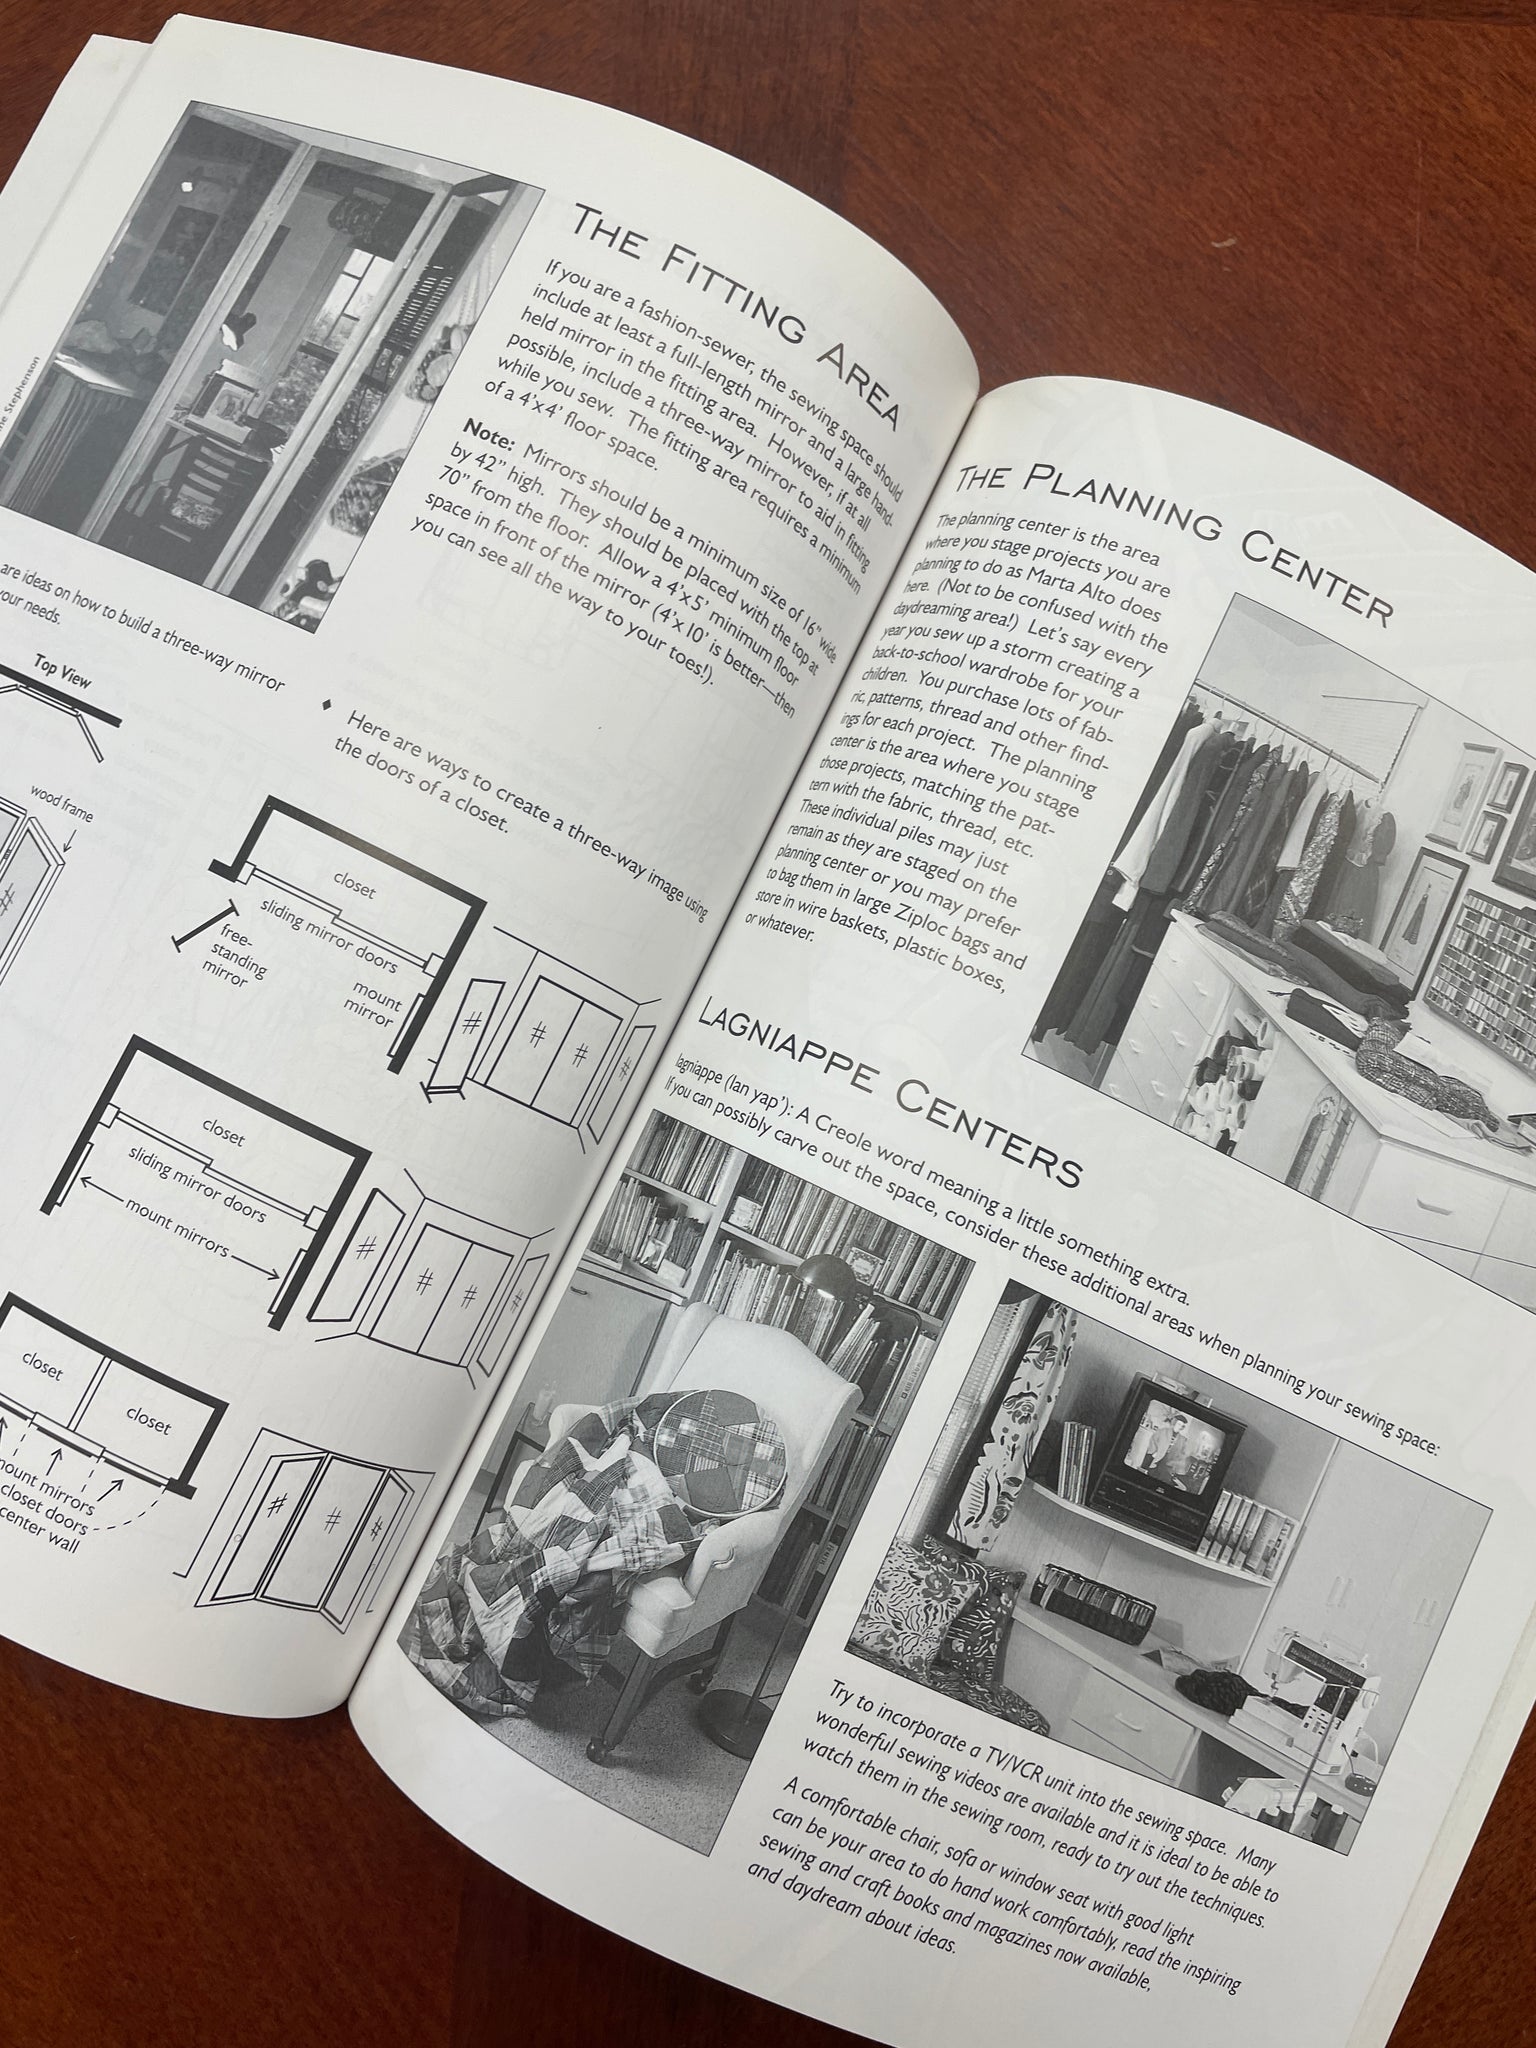 1996 Decorating Book - "Dream Sewing Spaces"